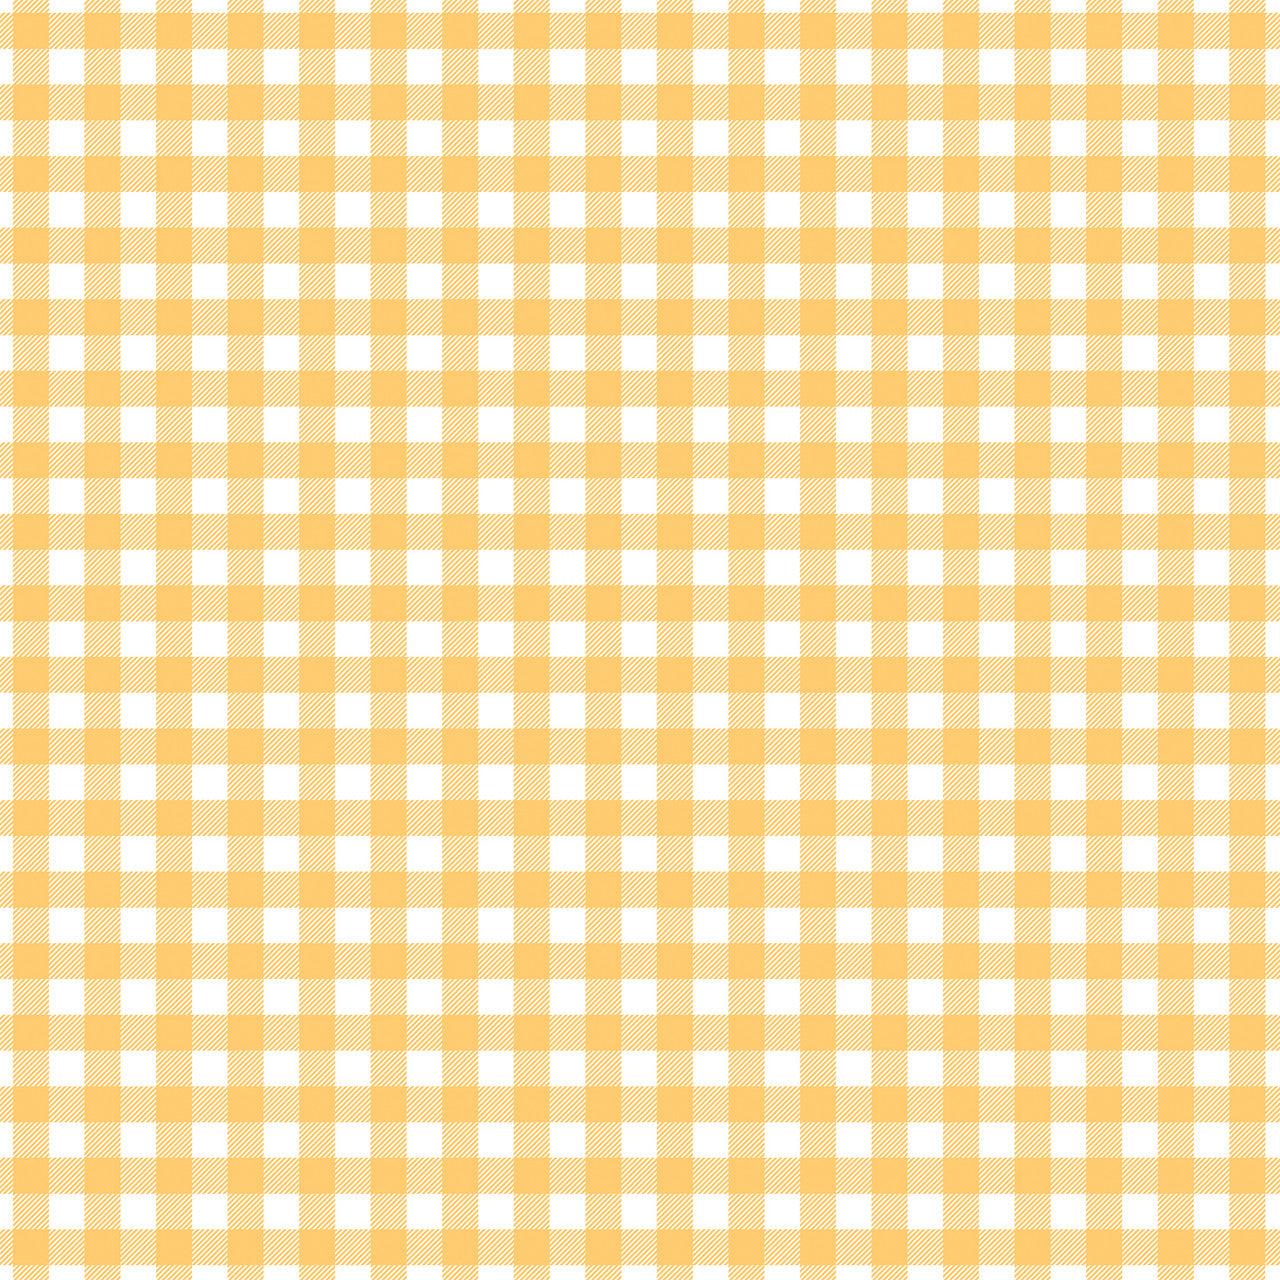 Bee Happy Collection Bee Friends 12 x 12 Double-Sided Scrapbook Paper by Echo Park Paper - Scrapbook Supply Companies